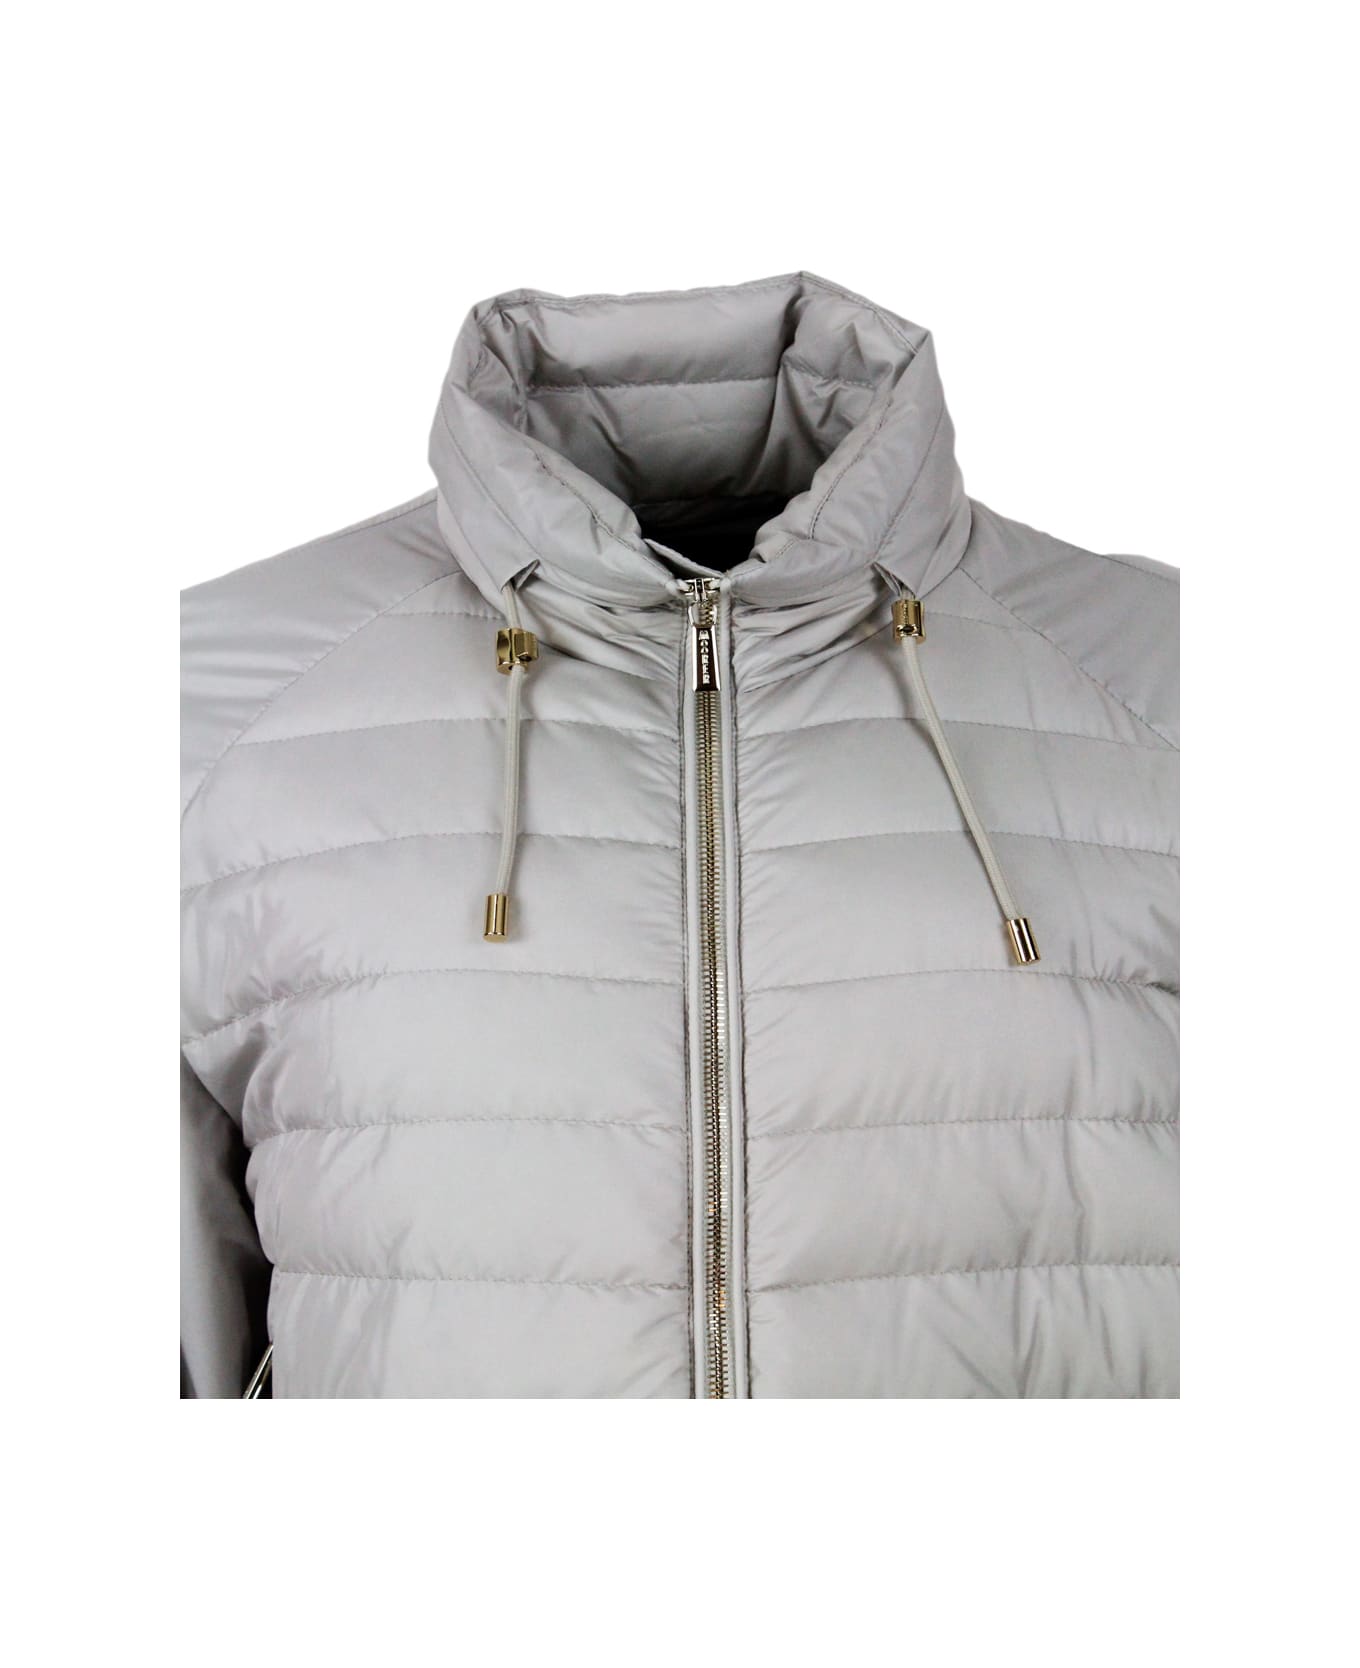 Moorer Lightweight 100 Gram Fine Down Jacket With An A-line Shape And Adjustable Drawstring At The Hem And Neck. Zip Closure - Ice